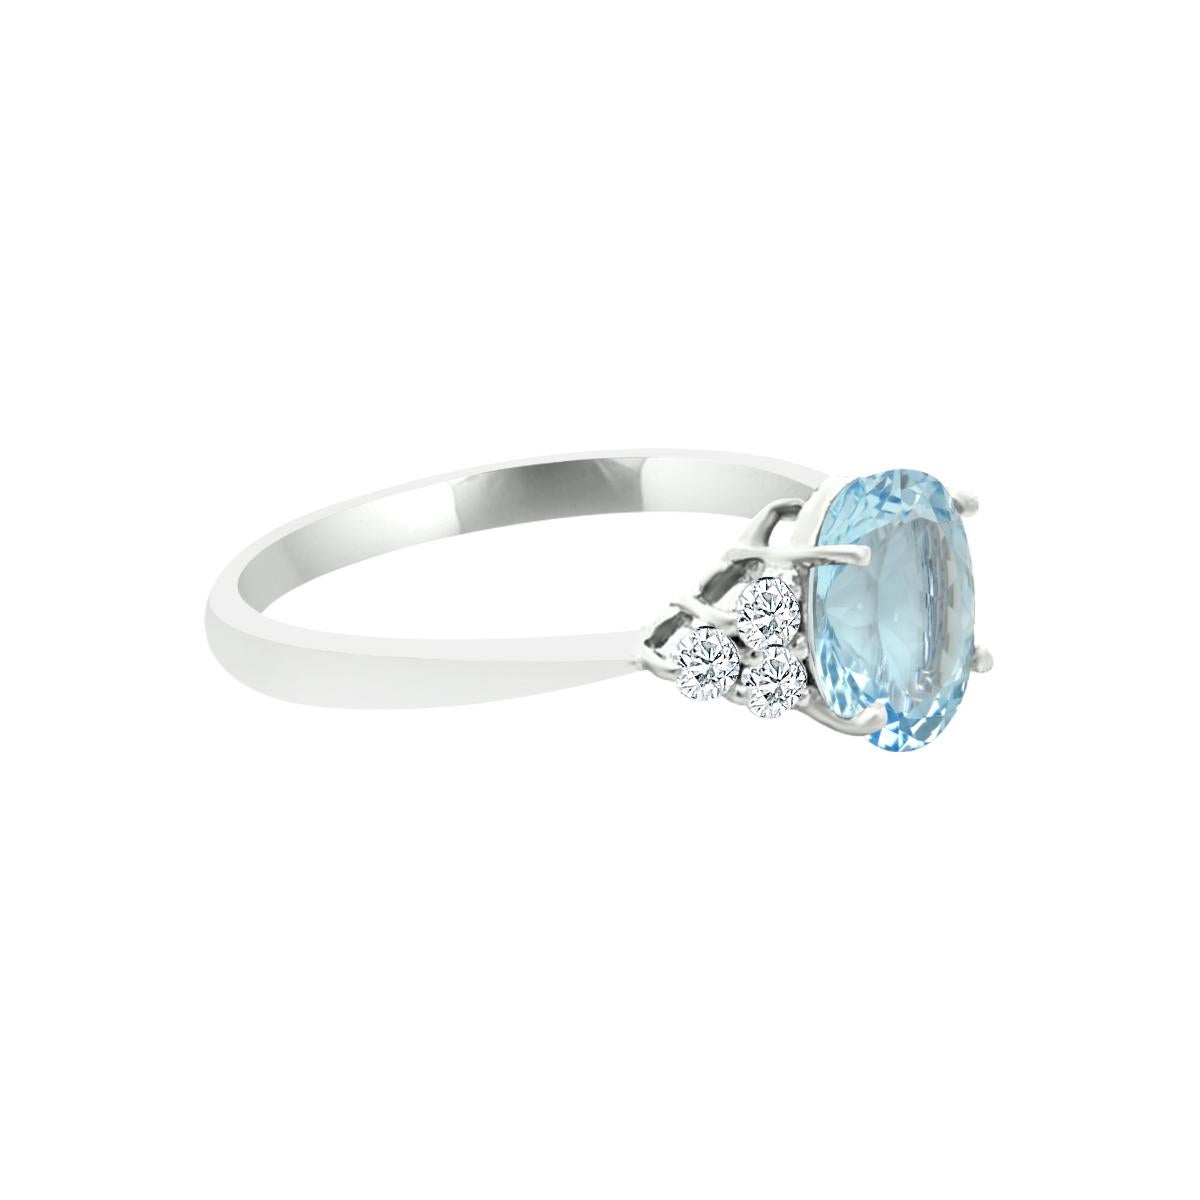 Modern 14K White Gold 1.29cts Aquamarine And Diamond Ring. Style# TS8266AQR 22057/7 For Sale